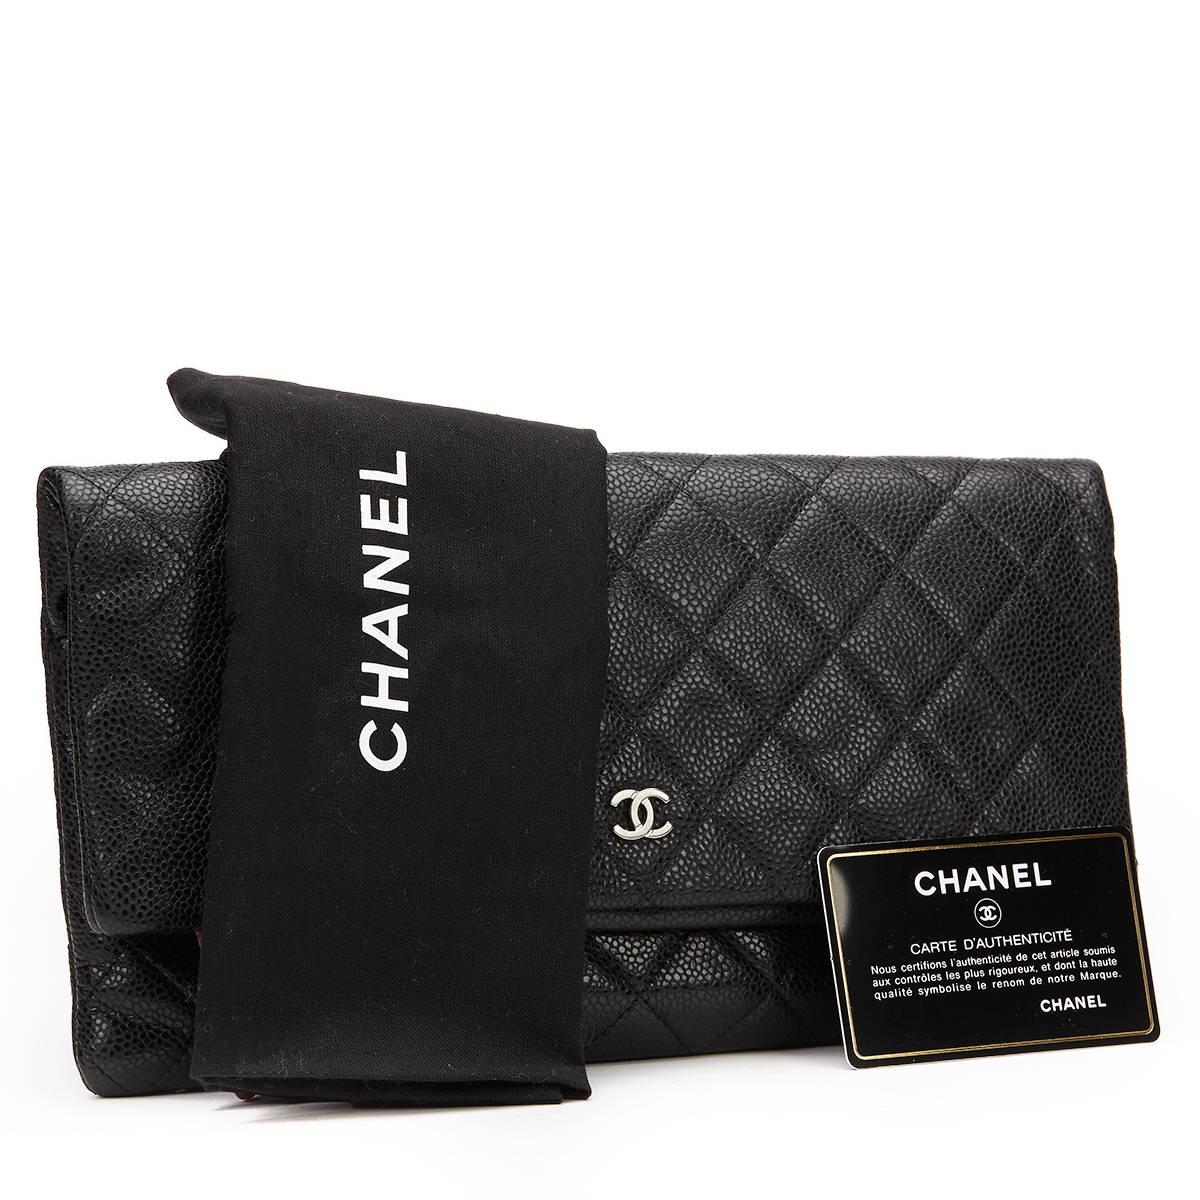 2015 Chanel Black Quilted Caviar Leather Beauty CC Foldover Clutch 3